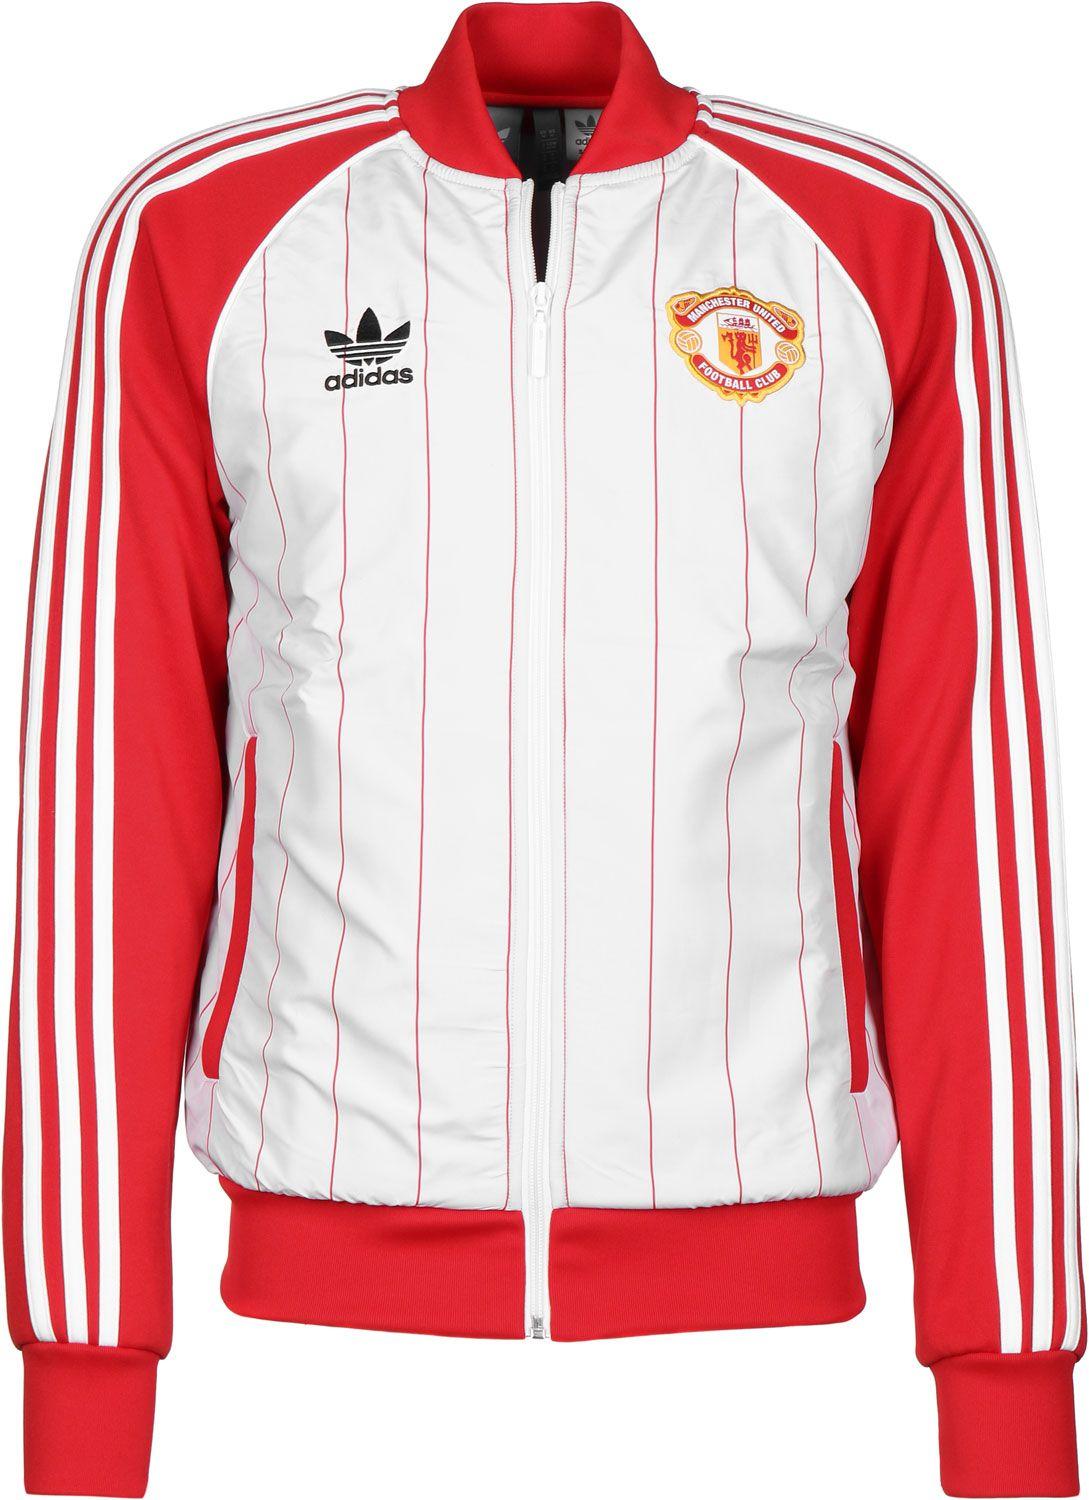 Red and White TT Logo - adidas Manchester United TT track top red white